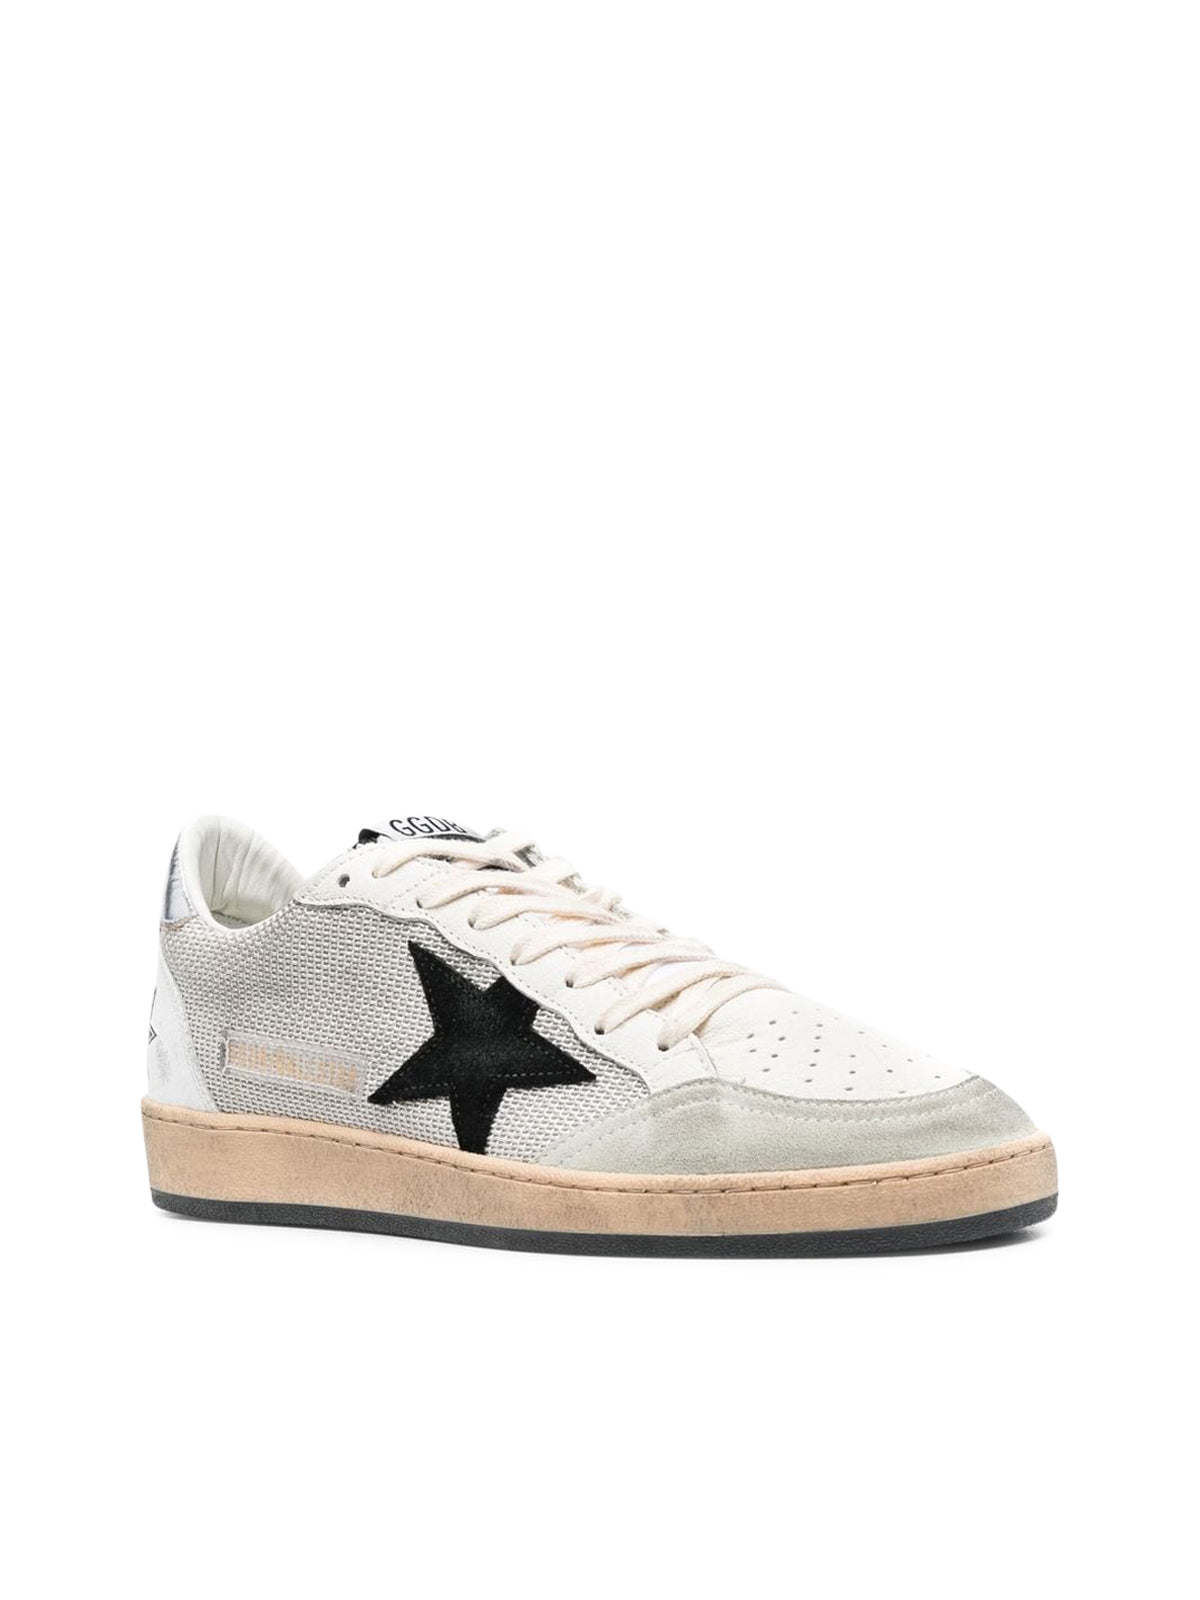 Ball-Star low-top sneakers